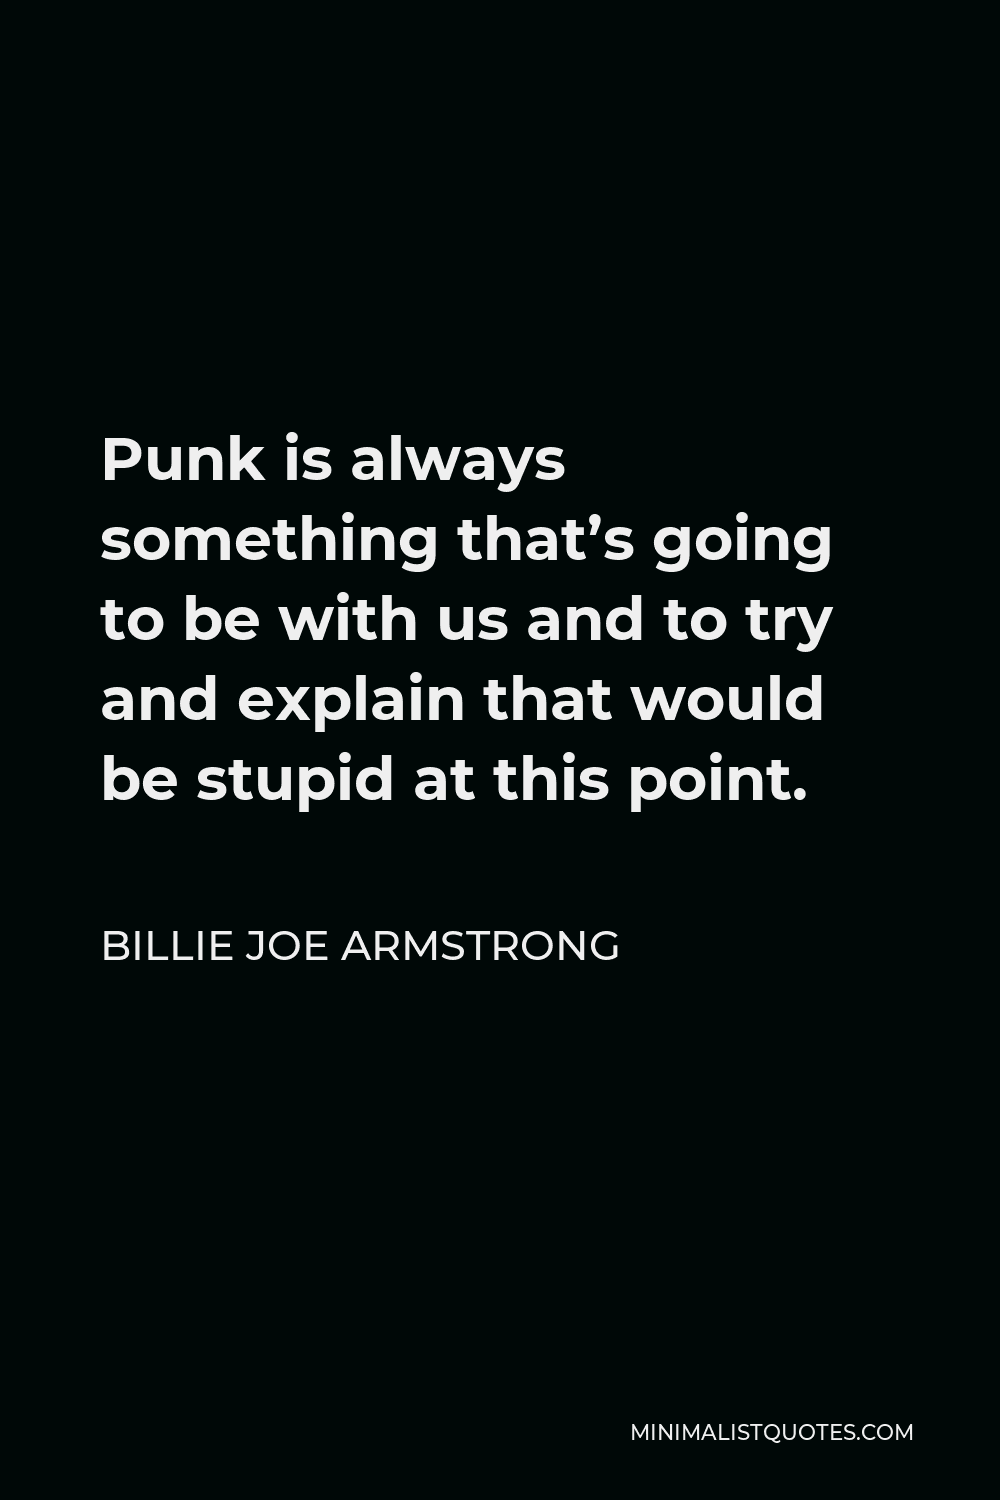 Billie Joe Armstrong Quote - Punk is always something that’s going to be with us and to try and explain that would be stupid at this point.